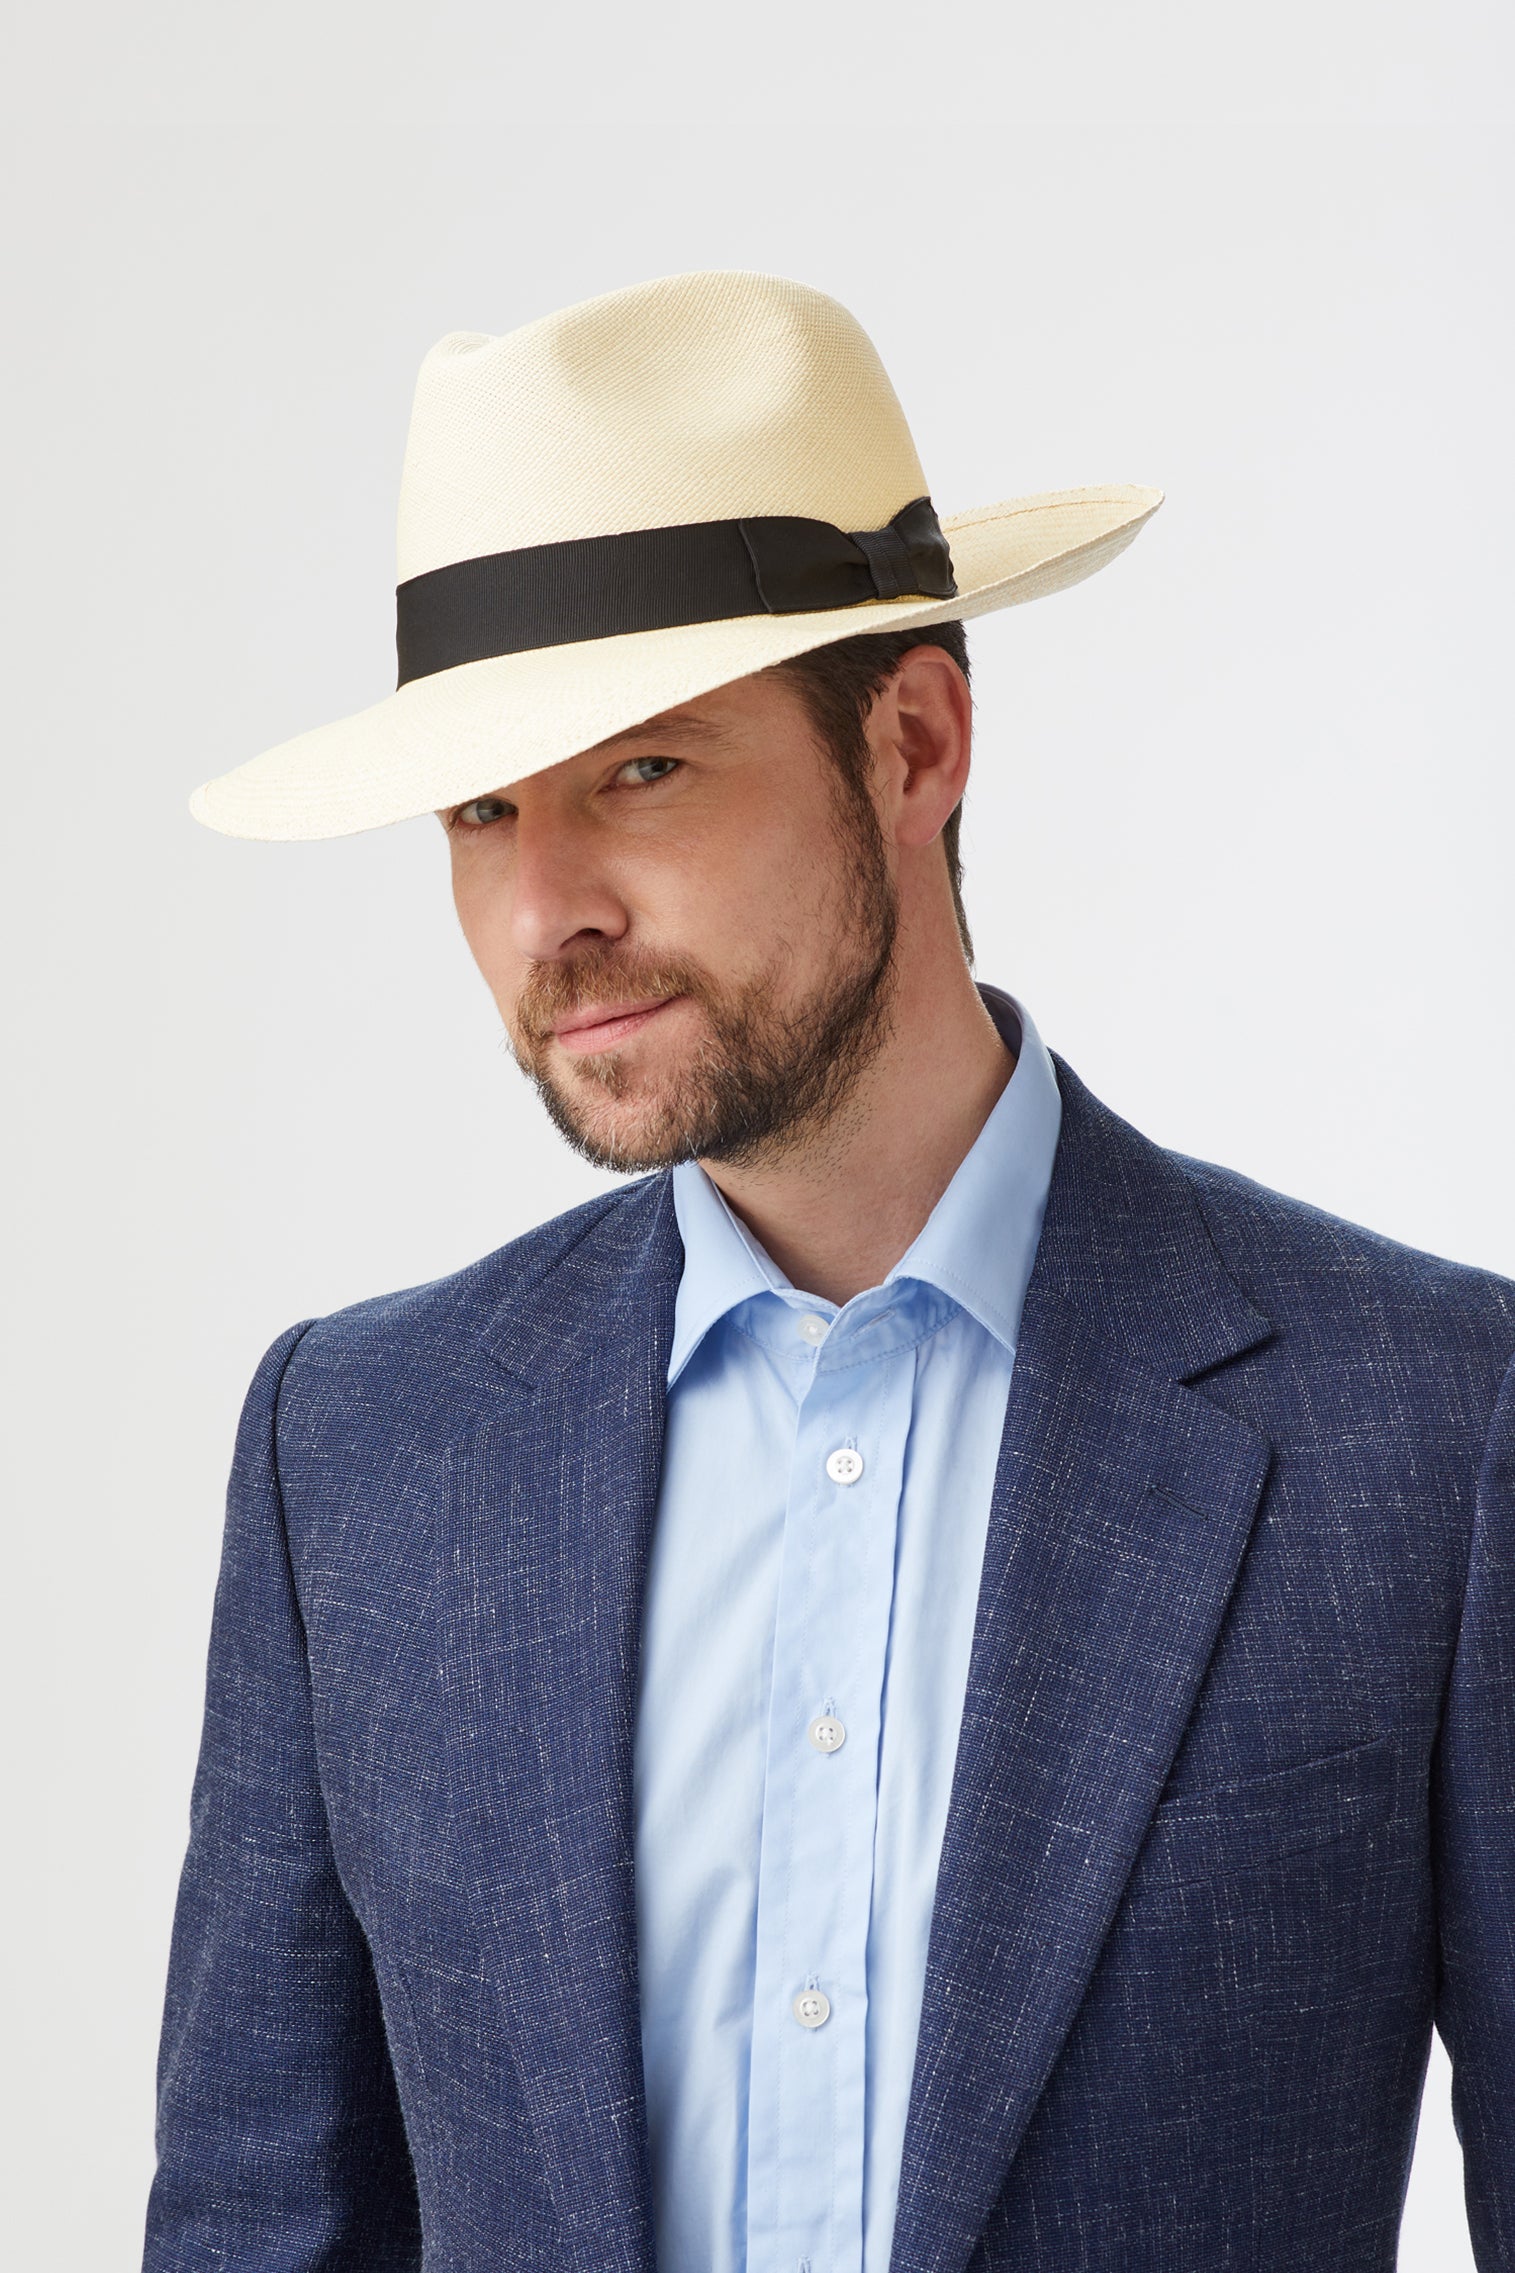 Wide Brim Panama - Father's Day Gift Guide - Lock & Co. Hatters London UK